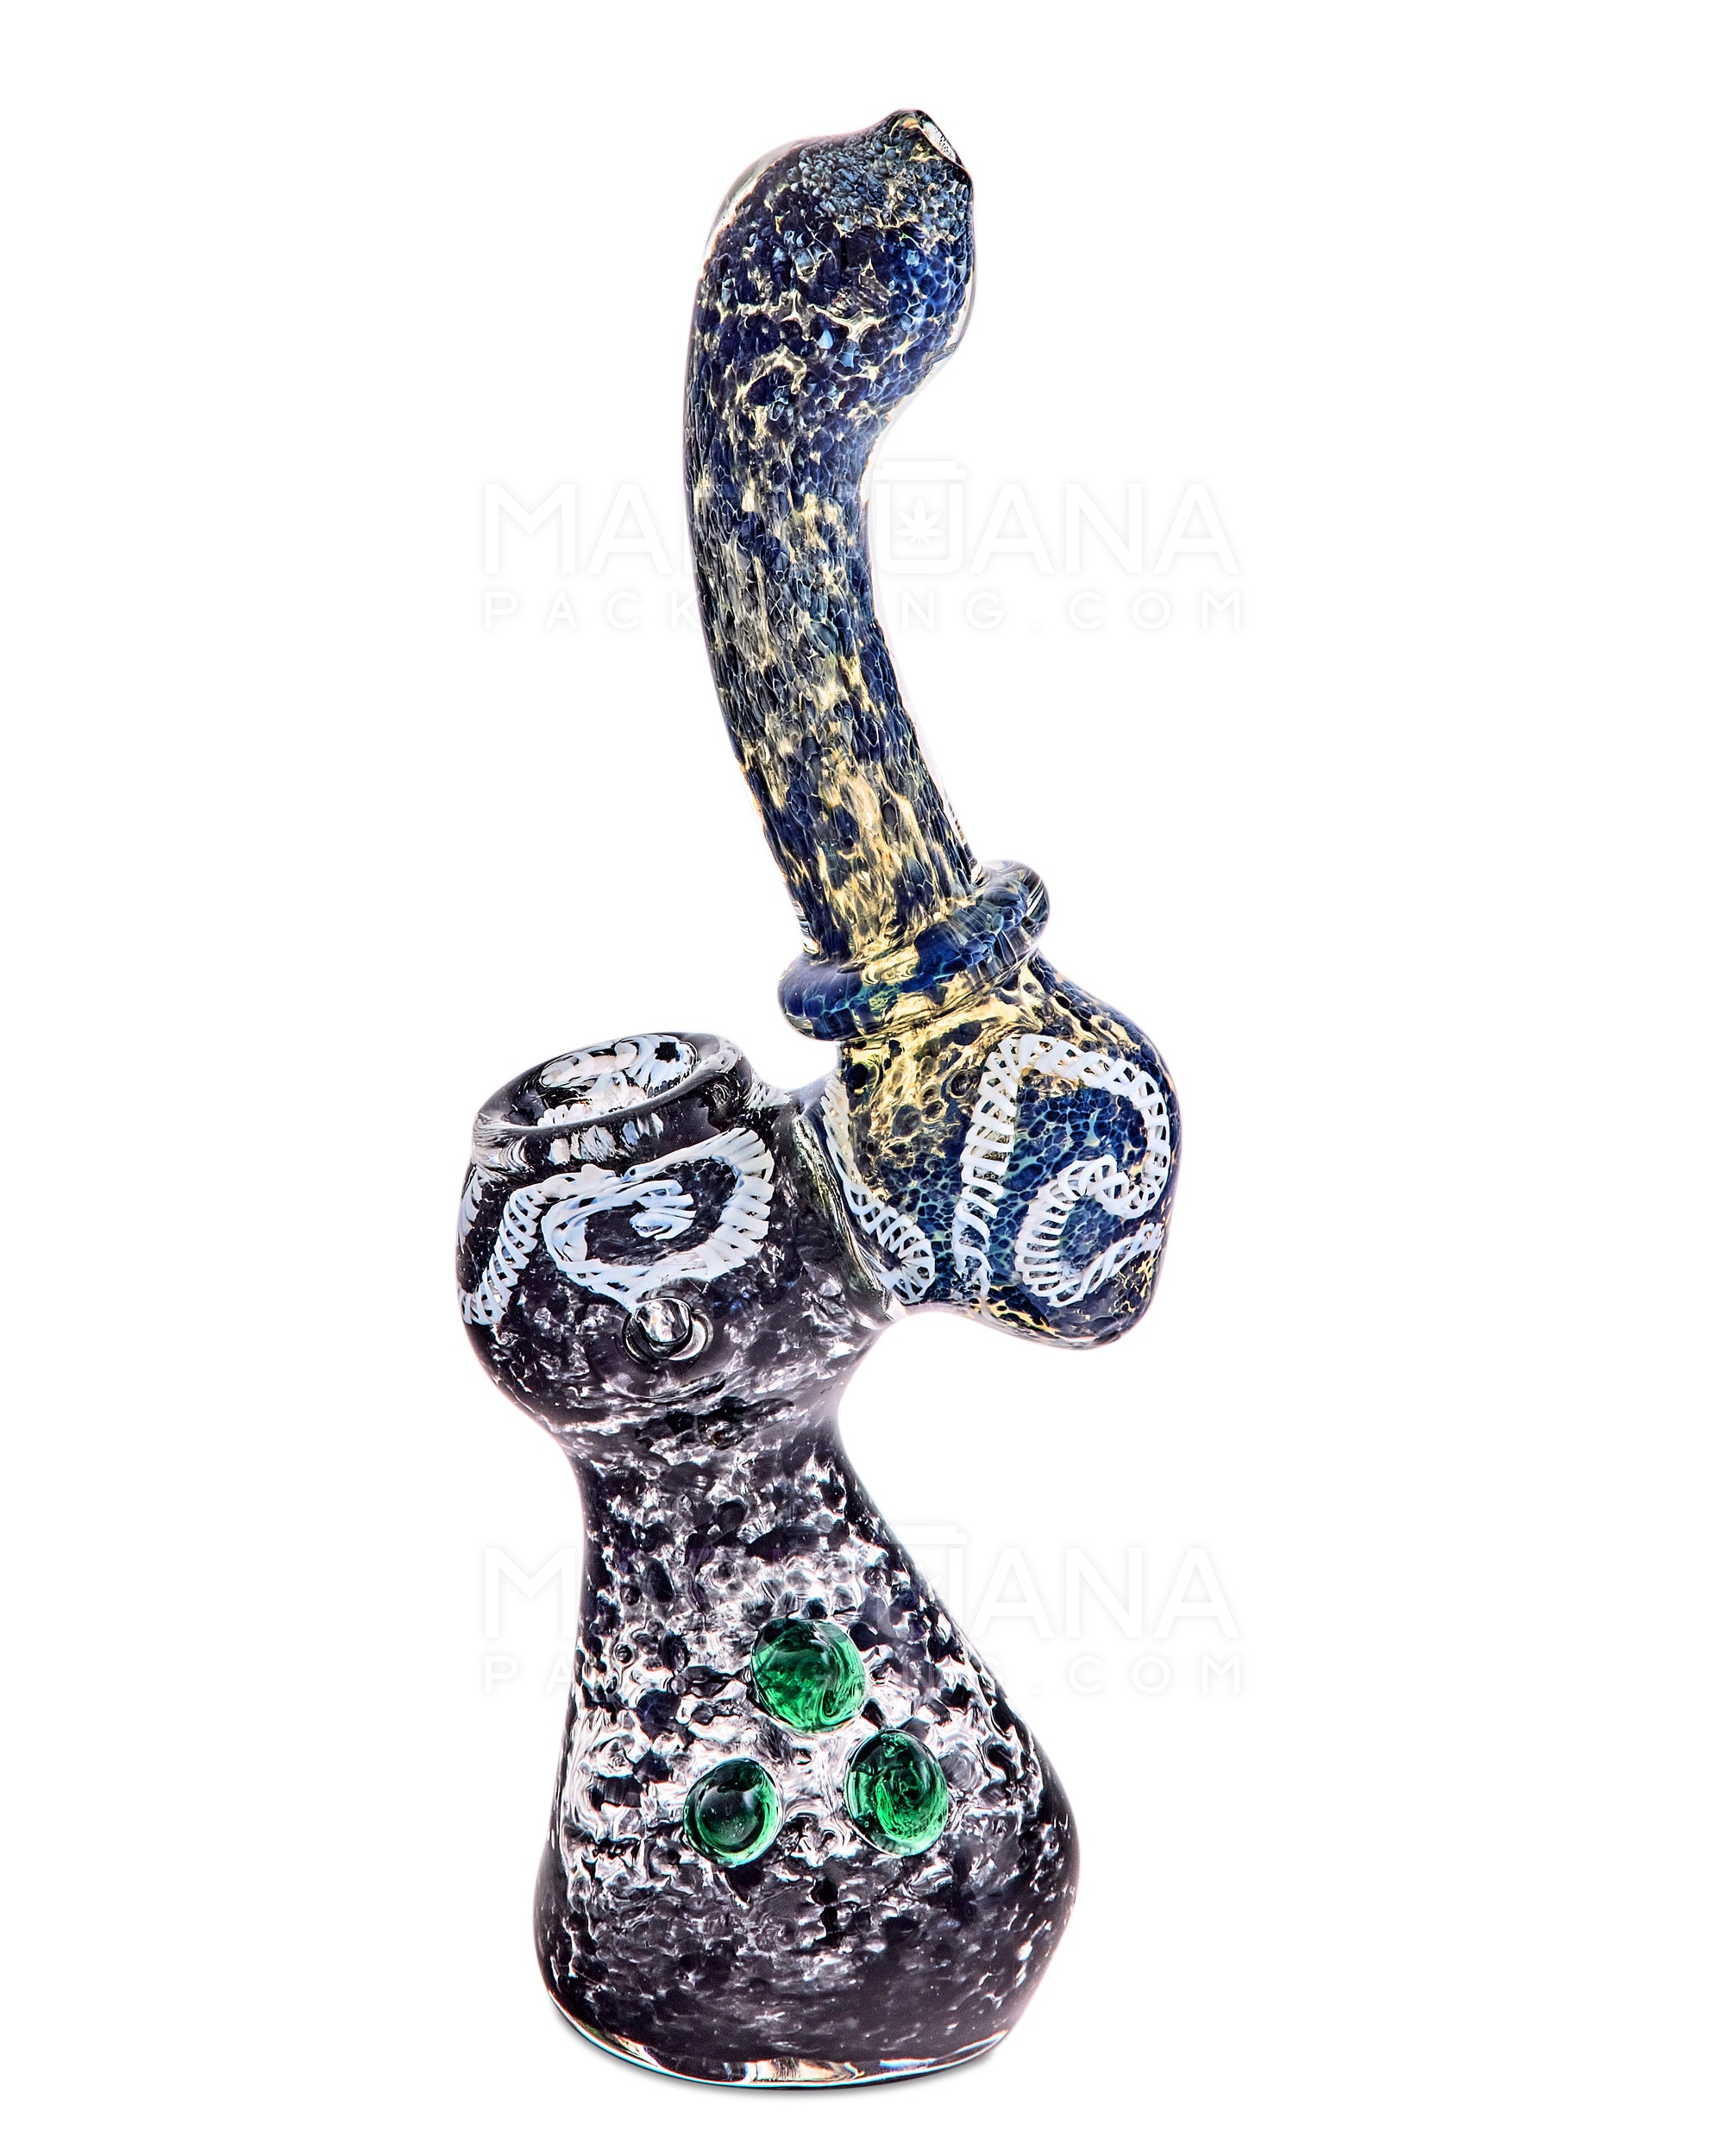 Frit & Gold Fumed Ringed Bubbler w/ Ribboning & Triple Knockers | 8in Tall - Glass - Blue - 9